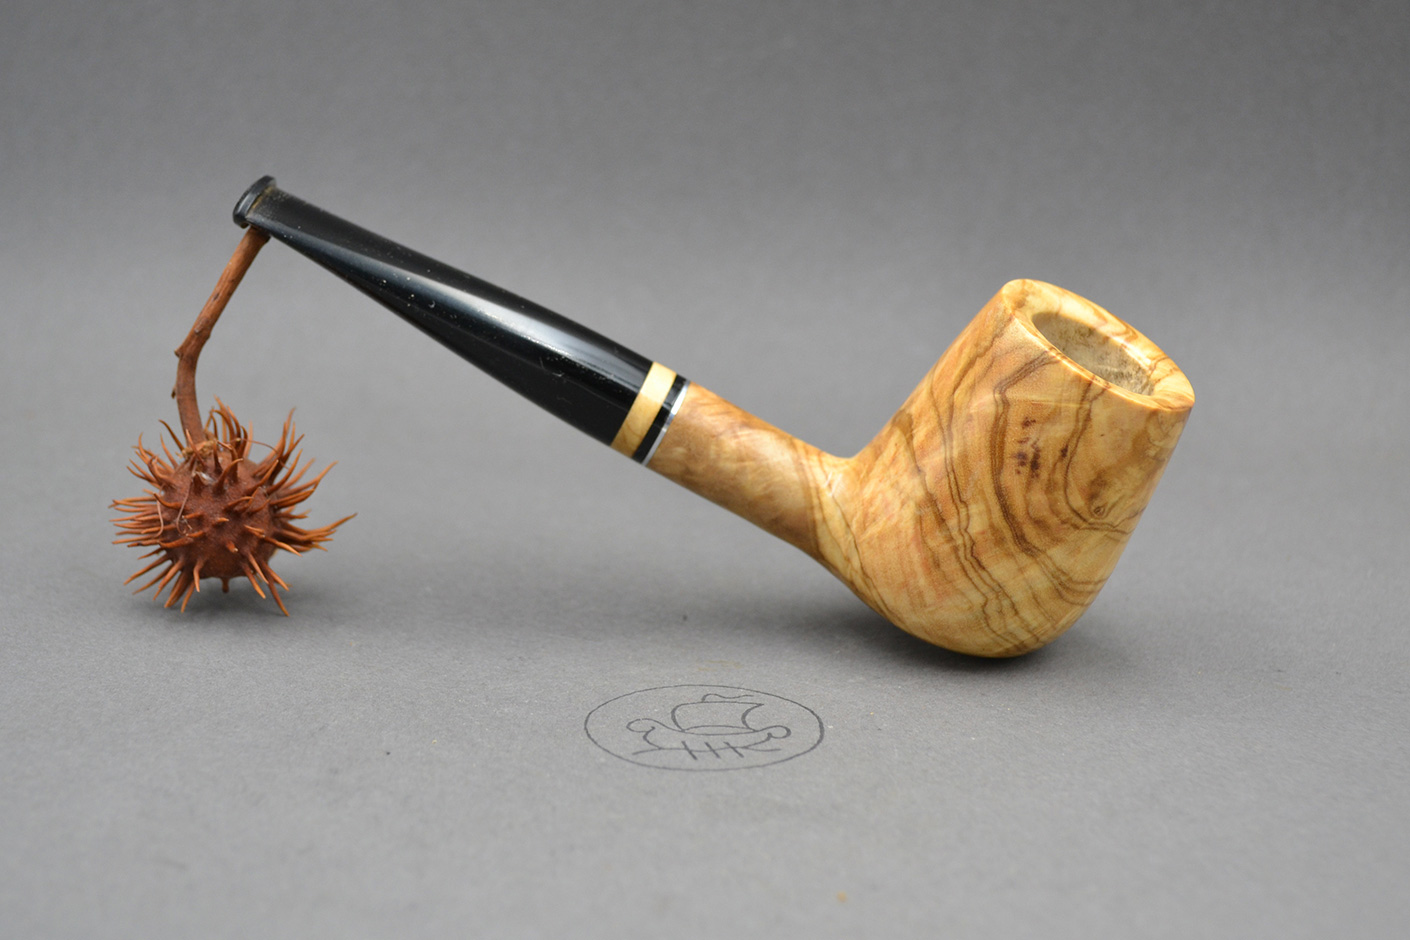 Roving – 23305 – Handmade Olivewood Tobacco Pipe